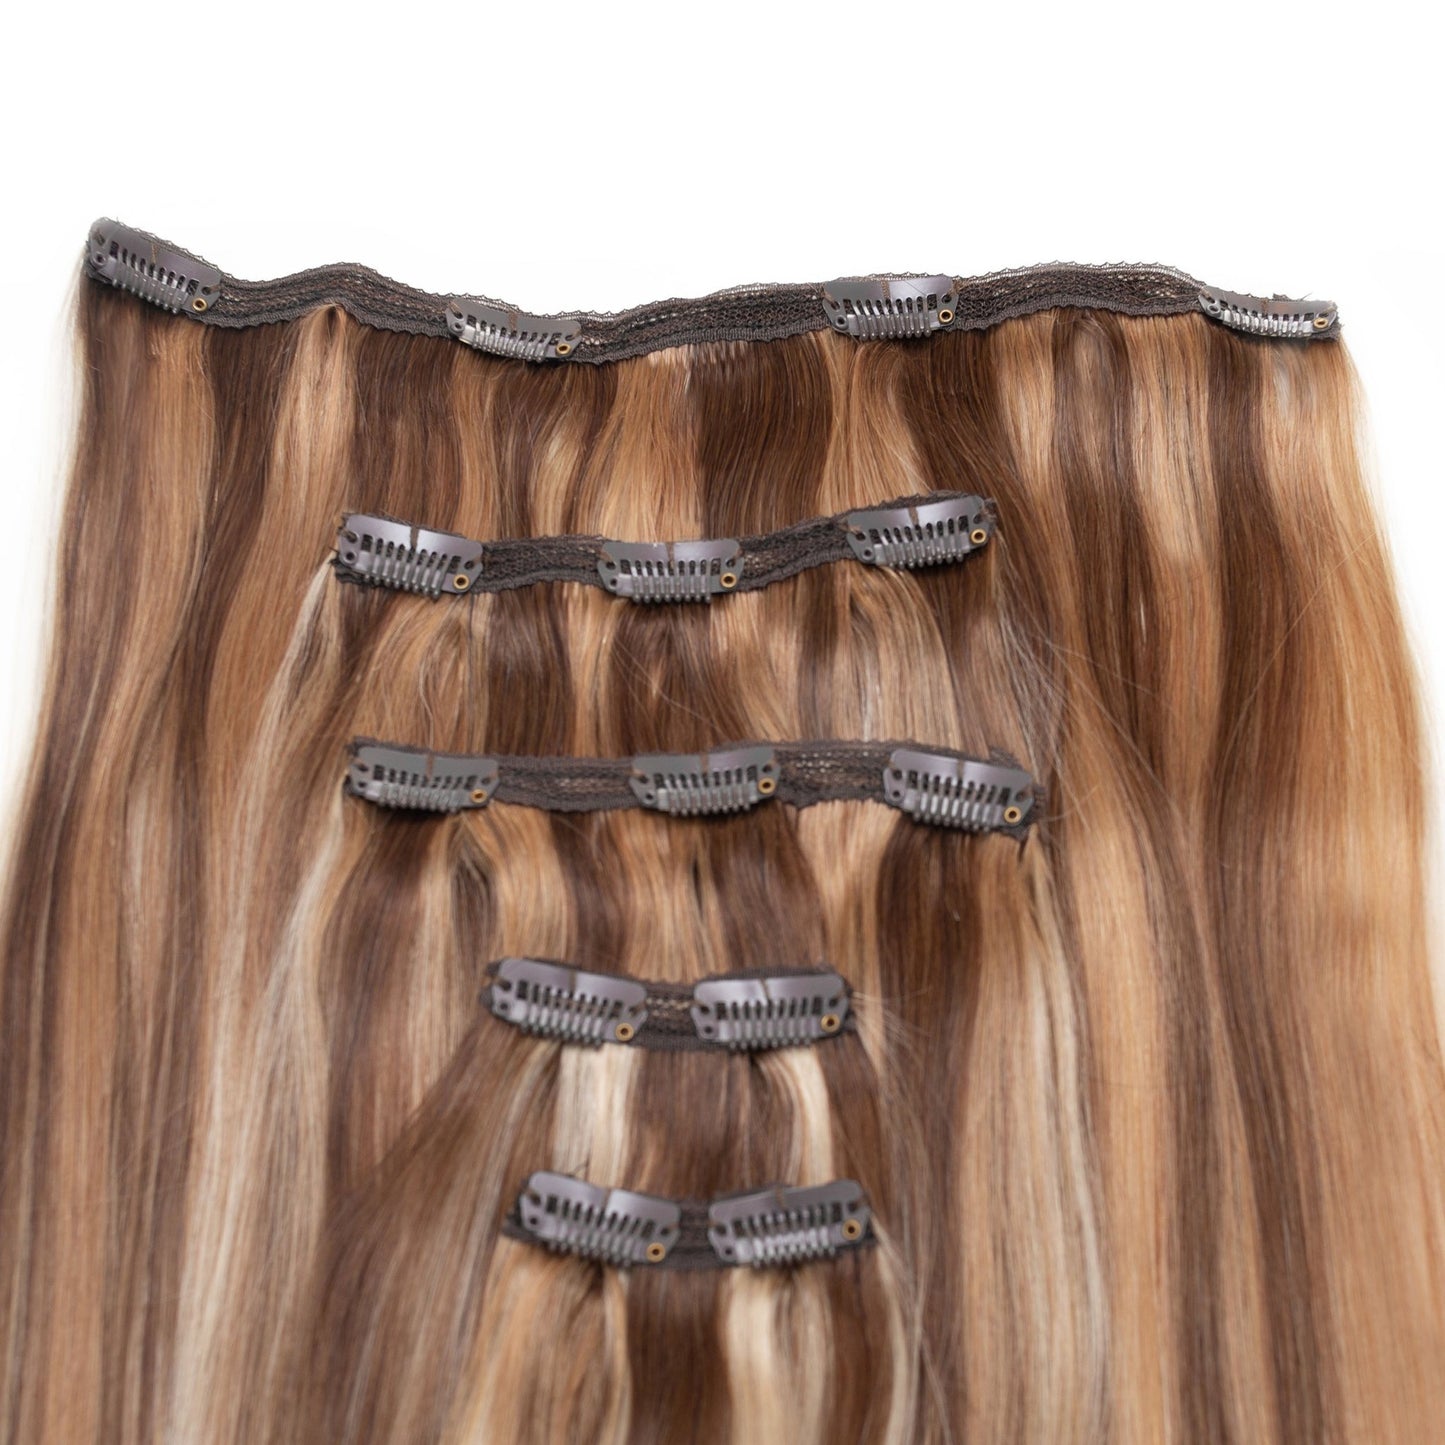 Seamless1 Vanilla Blend Piano Colour Human Hair in 5 Piece - shelley and co